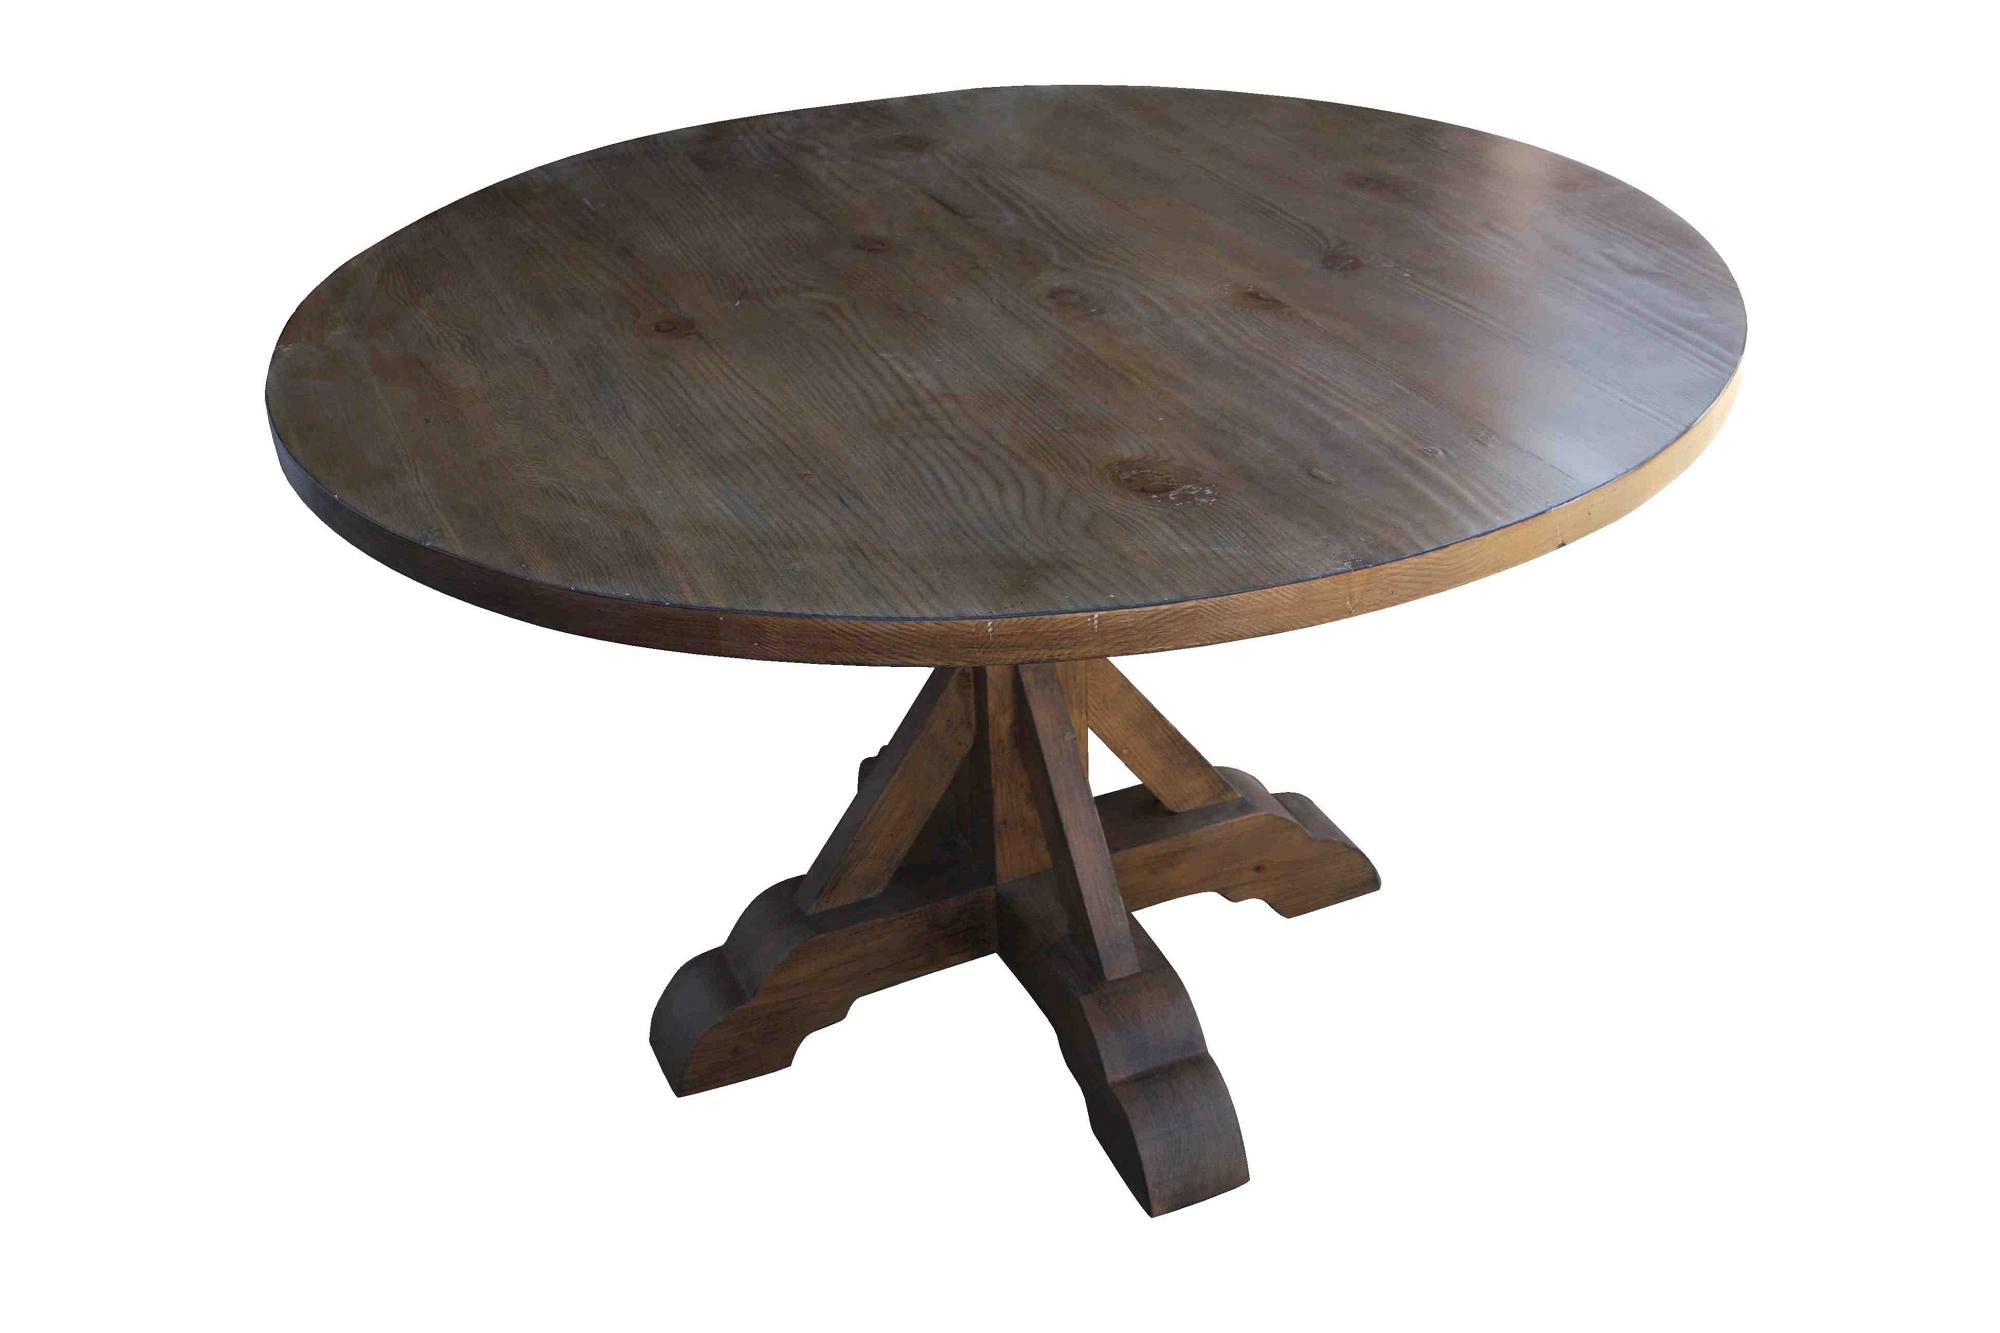 2000x1333px 8 Good Round Reclaimed Wood Dining Table Picture in Furniture